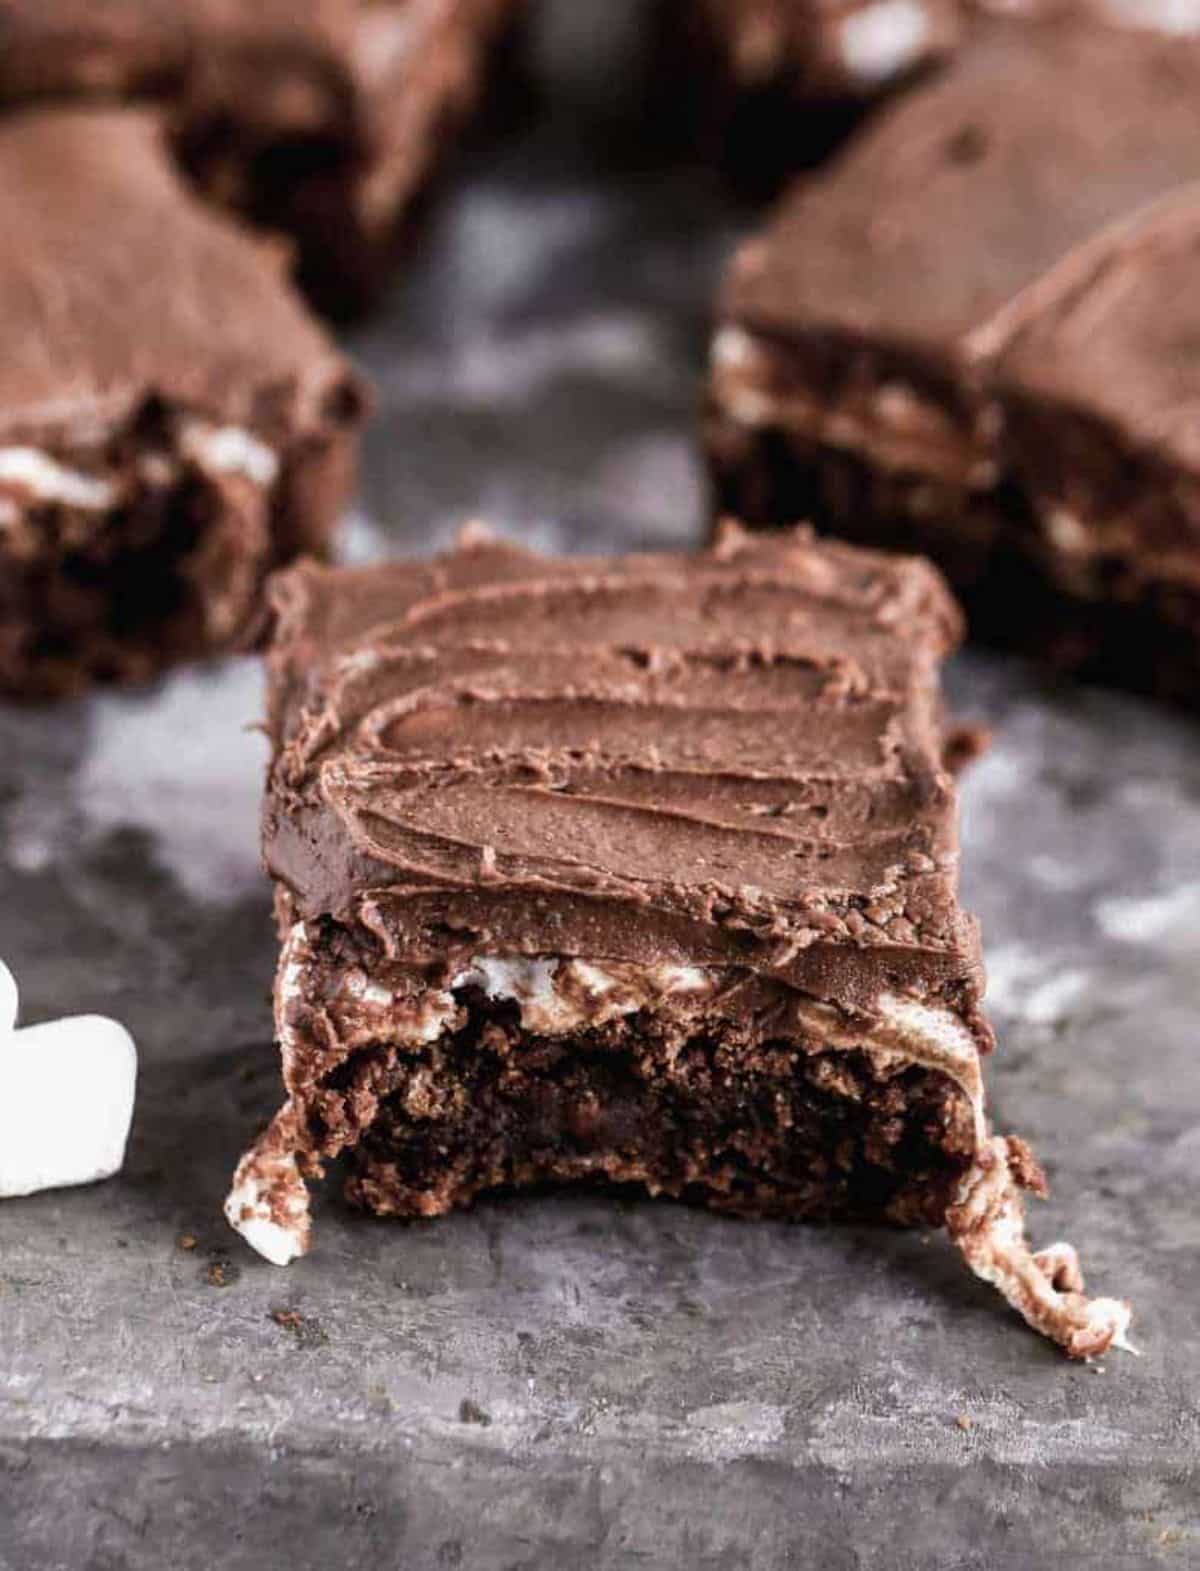 Mouth-watering mississippi mud brownies on a gray tray.